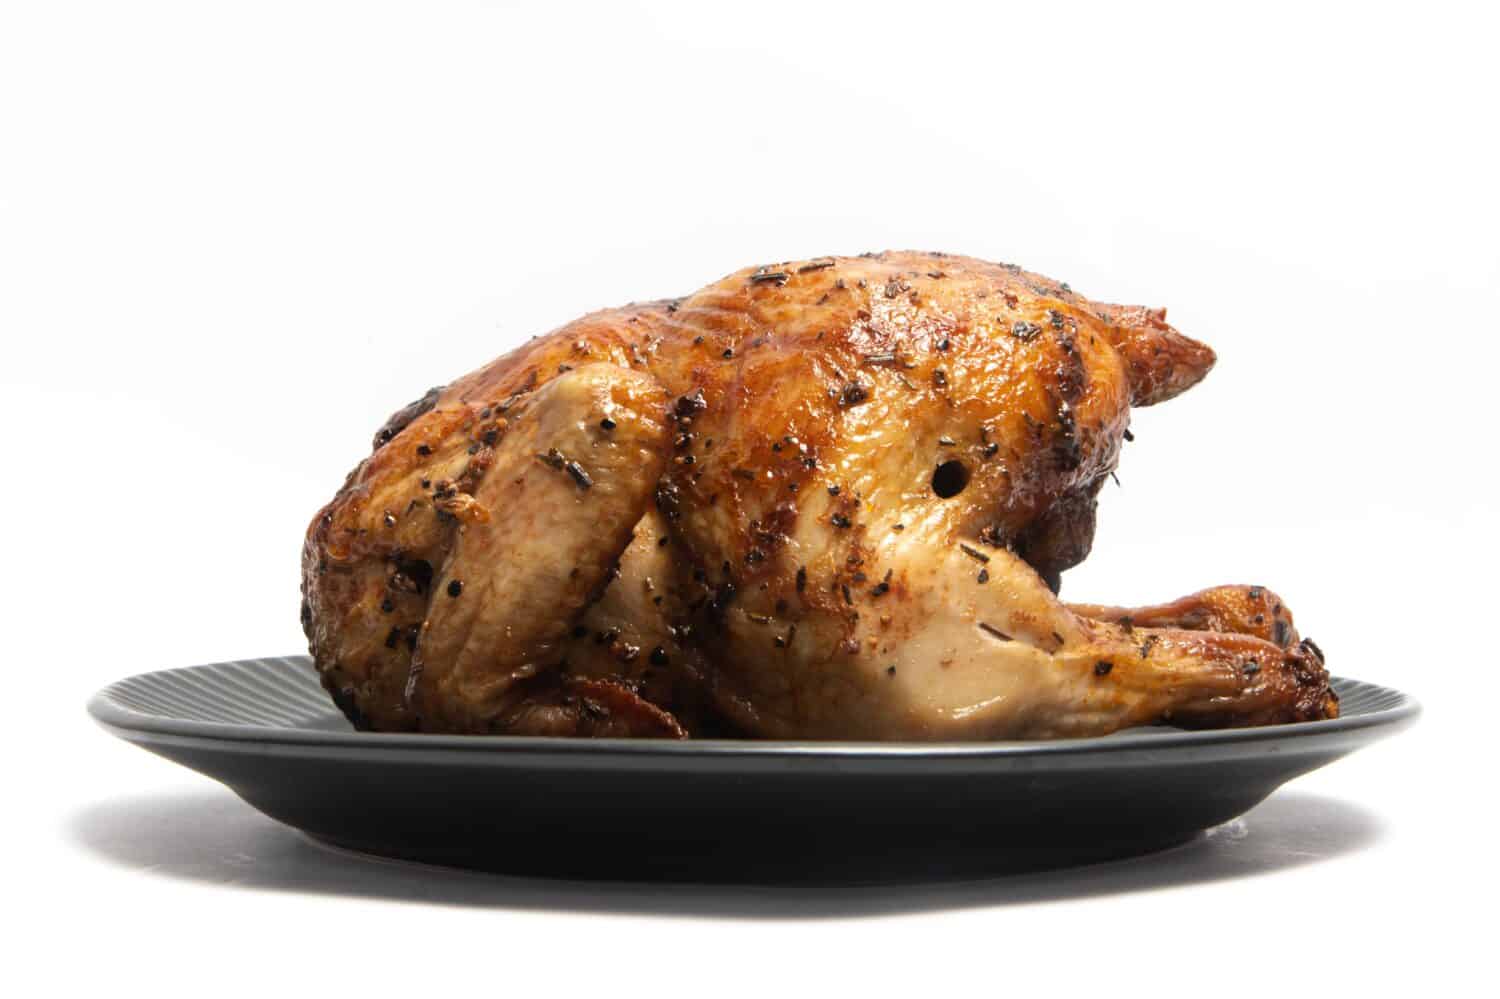 A whole delicious roasted chicken seasoned with herbs in a black plate isolated on white background clipping path